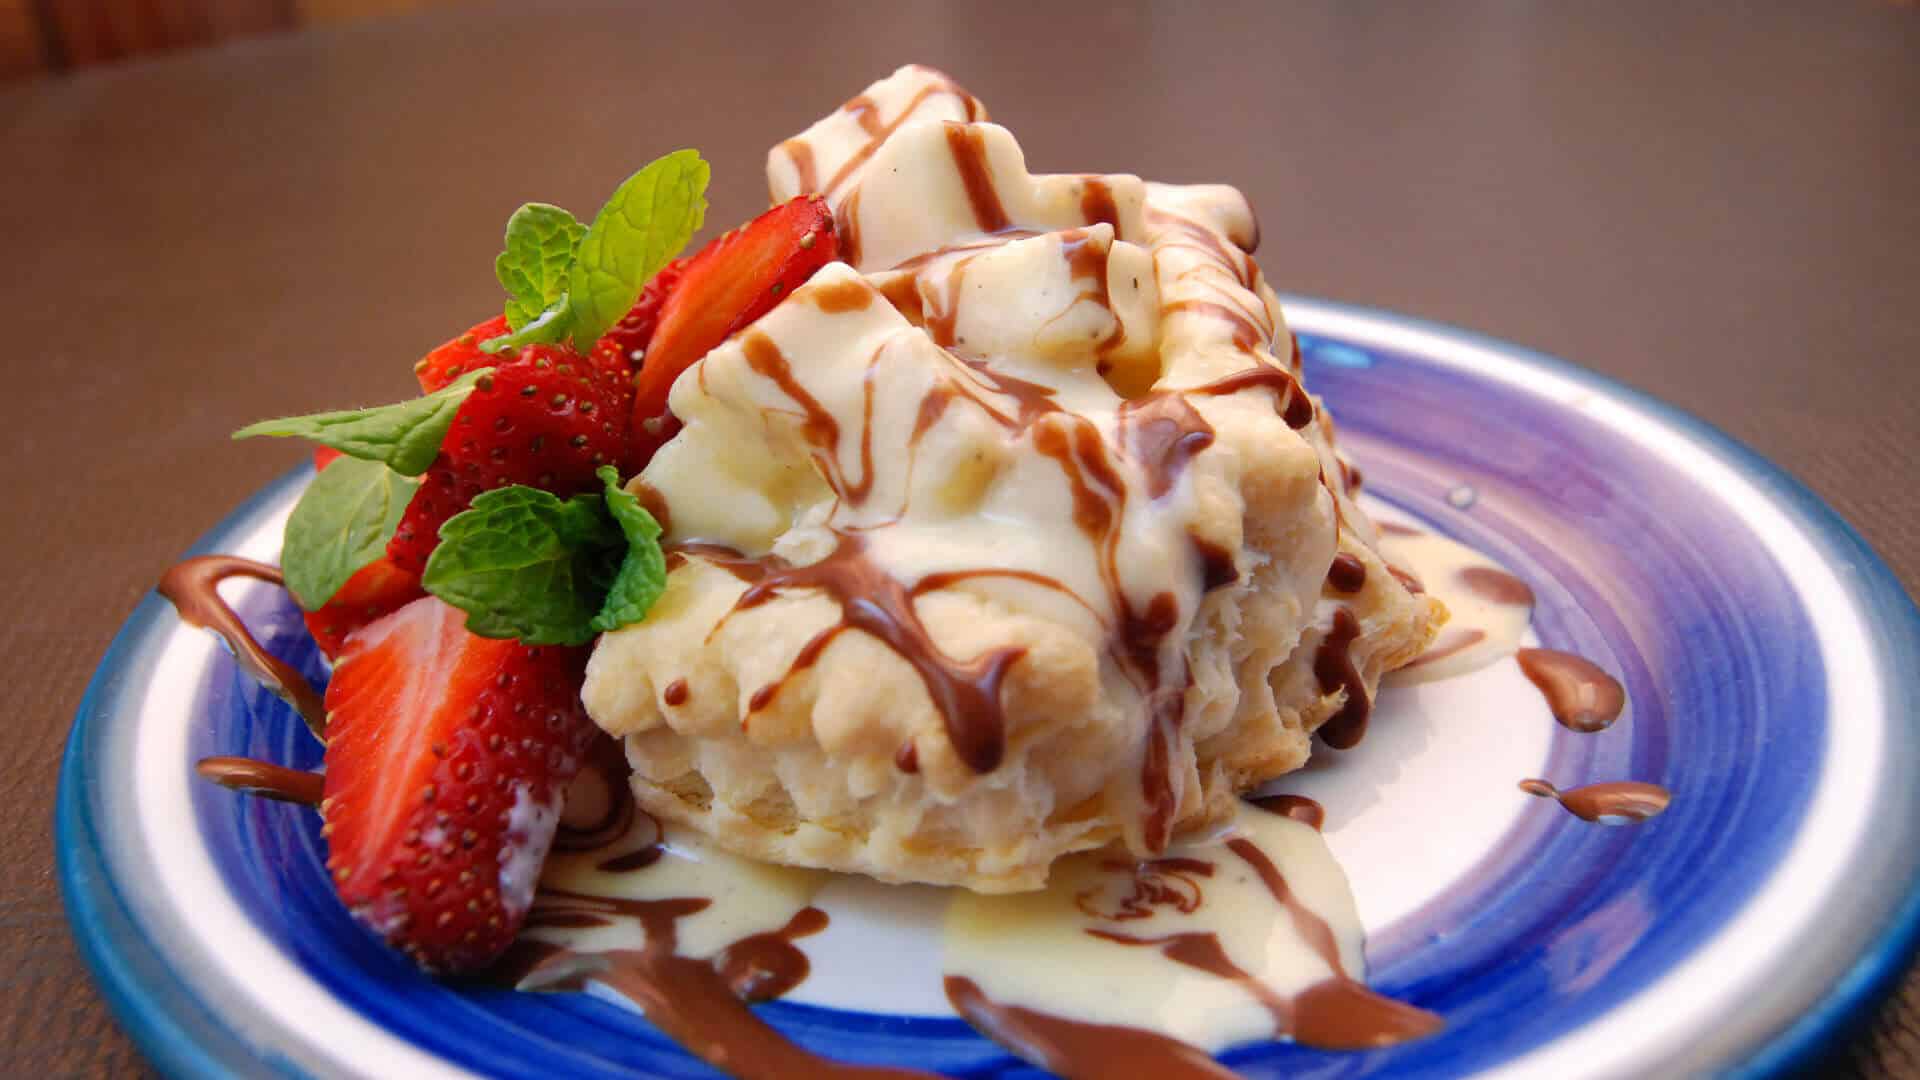 creamy chopped bananas in a puff pastry shell drizzled with chocolate and garnished with fresh strawberries